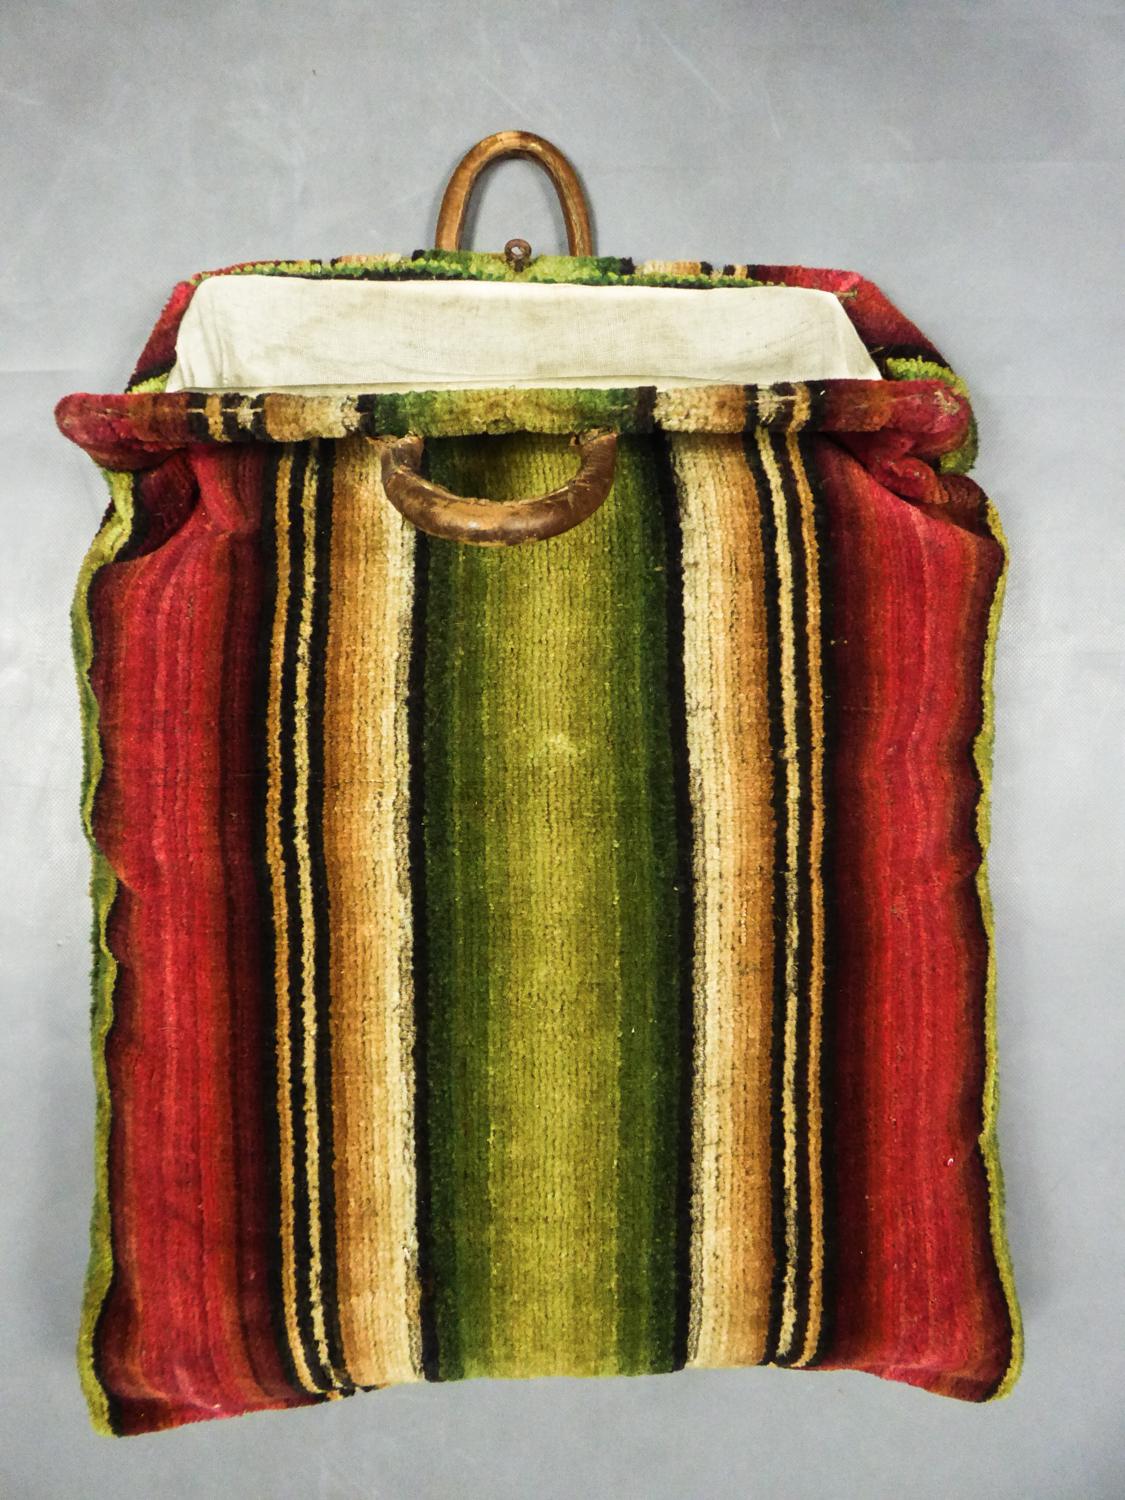 Late 18 th century
France

Rare Large wool tapestry travel bag dating from the 18th century. White calf skin covered with an embroidered and knotted wool tapestry, then cut to give the effect of velvet. Beautiful shades of red, green, cream and